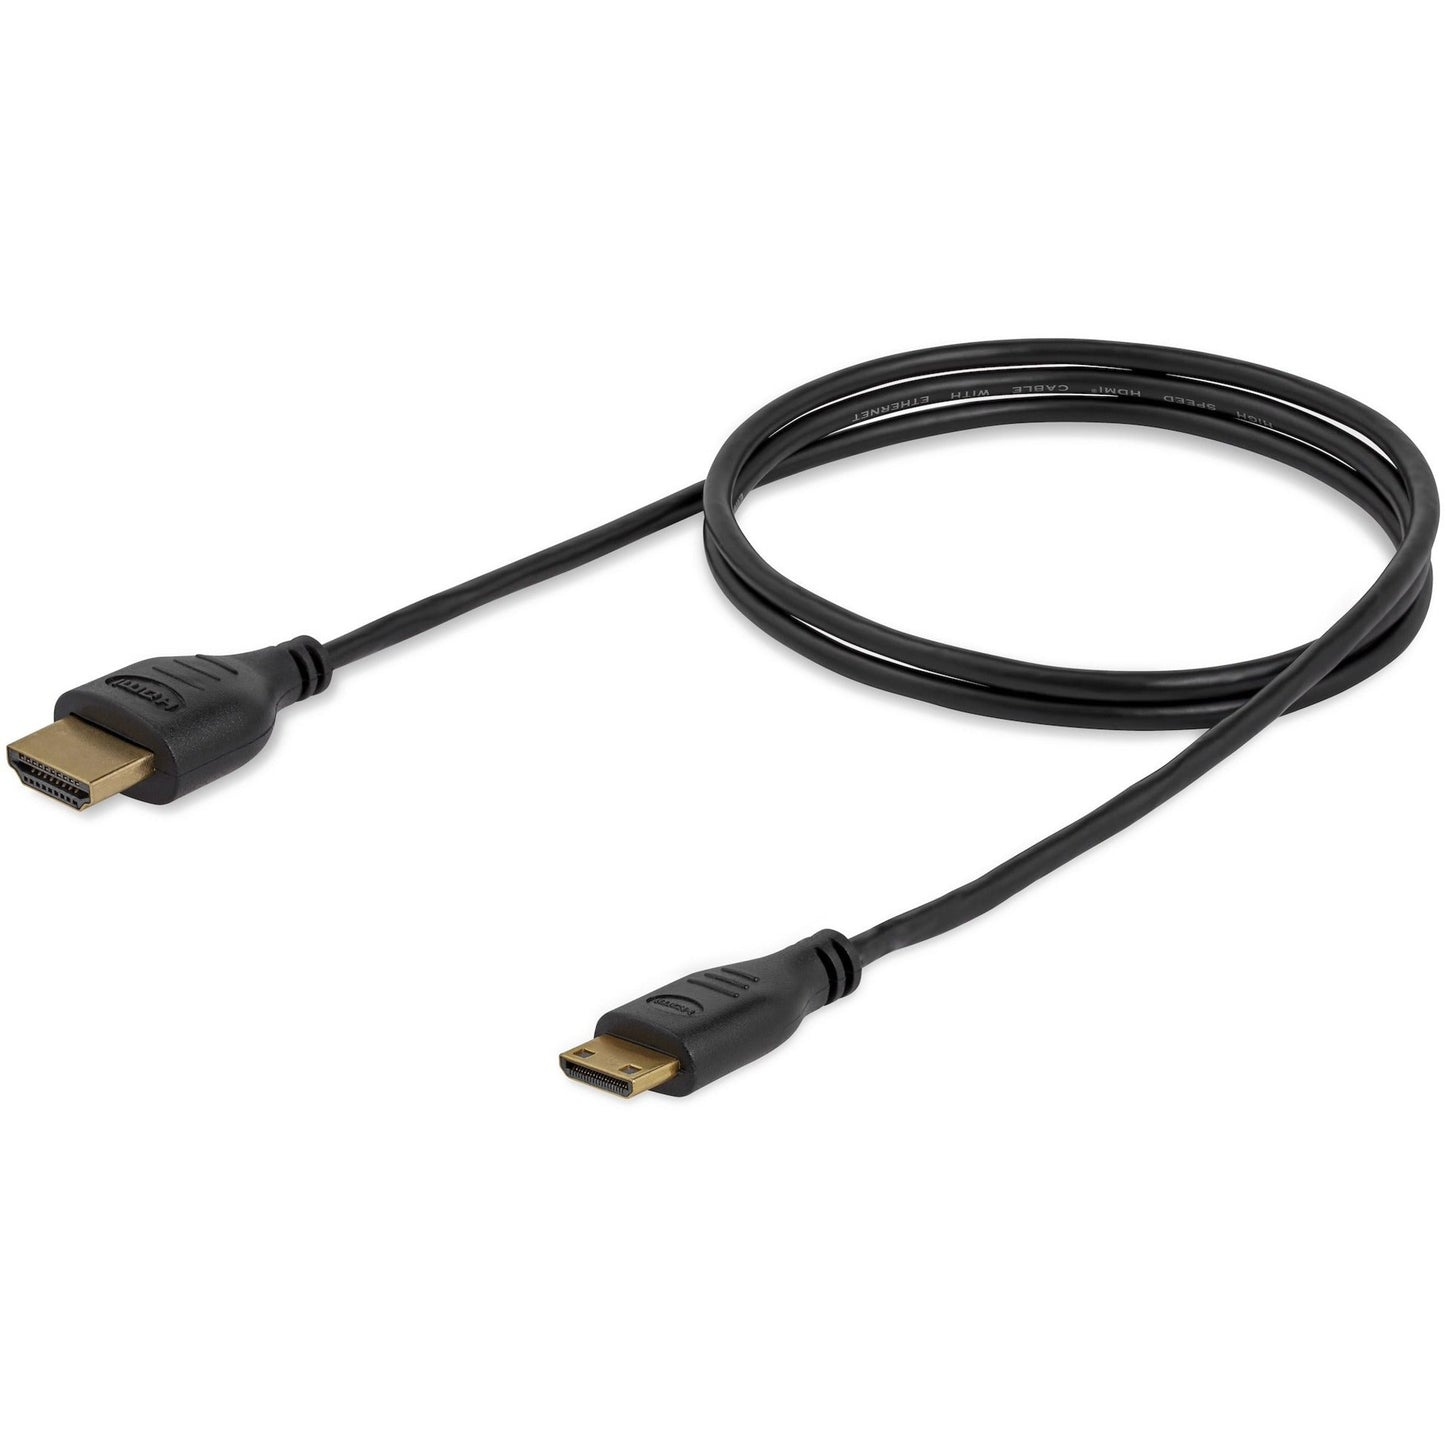 StarTech.com 3ft Mini HDMI to HDMI Cable with Ethernet 4K 30Hz High Speed Slim Mini HDMI 1.4 (Type-C) Device to HDMI Adapter Cable/Cord